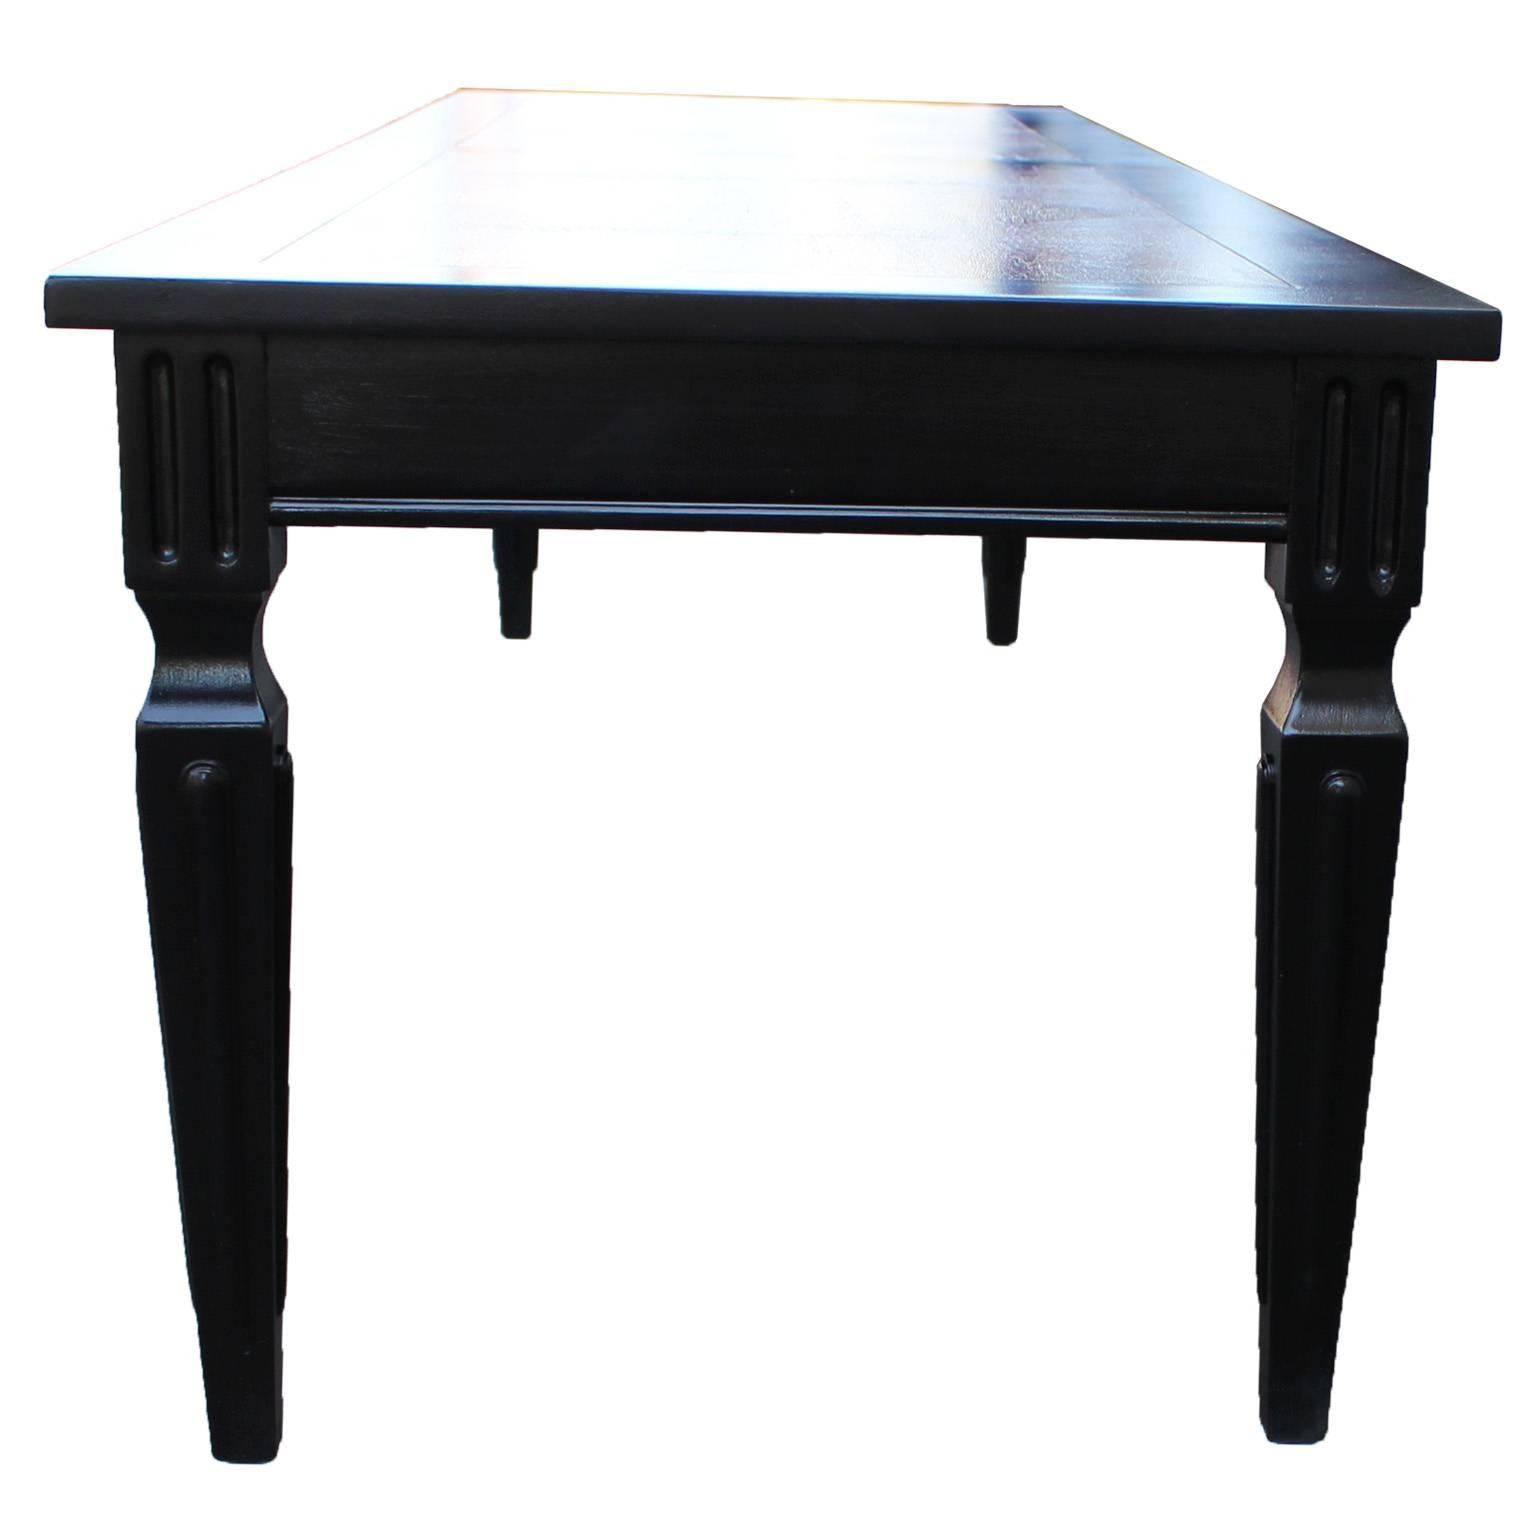 American Luxe Parquet and Ebonized Modern Two Tone Coffee Table by Baker